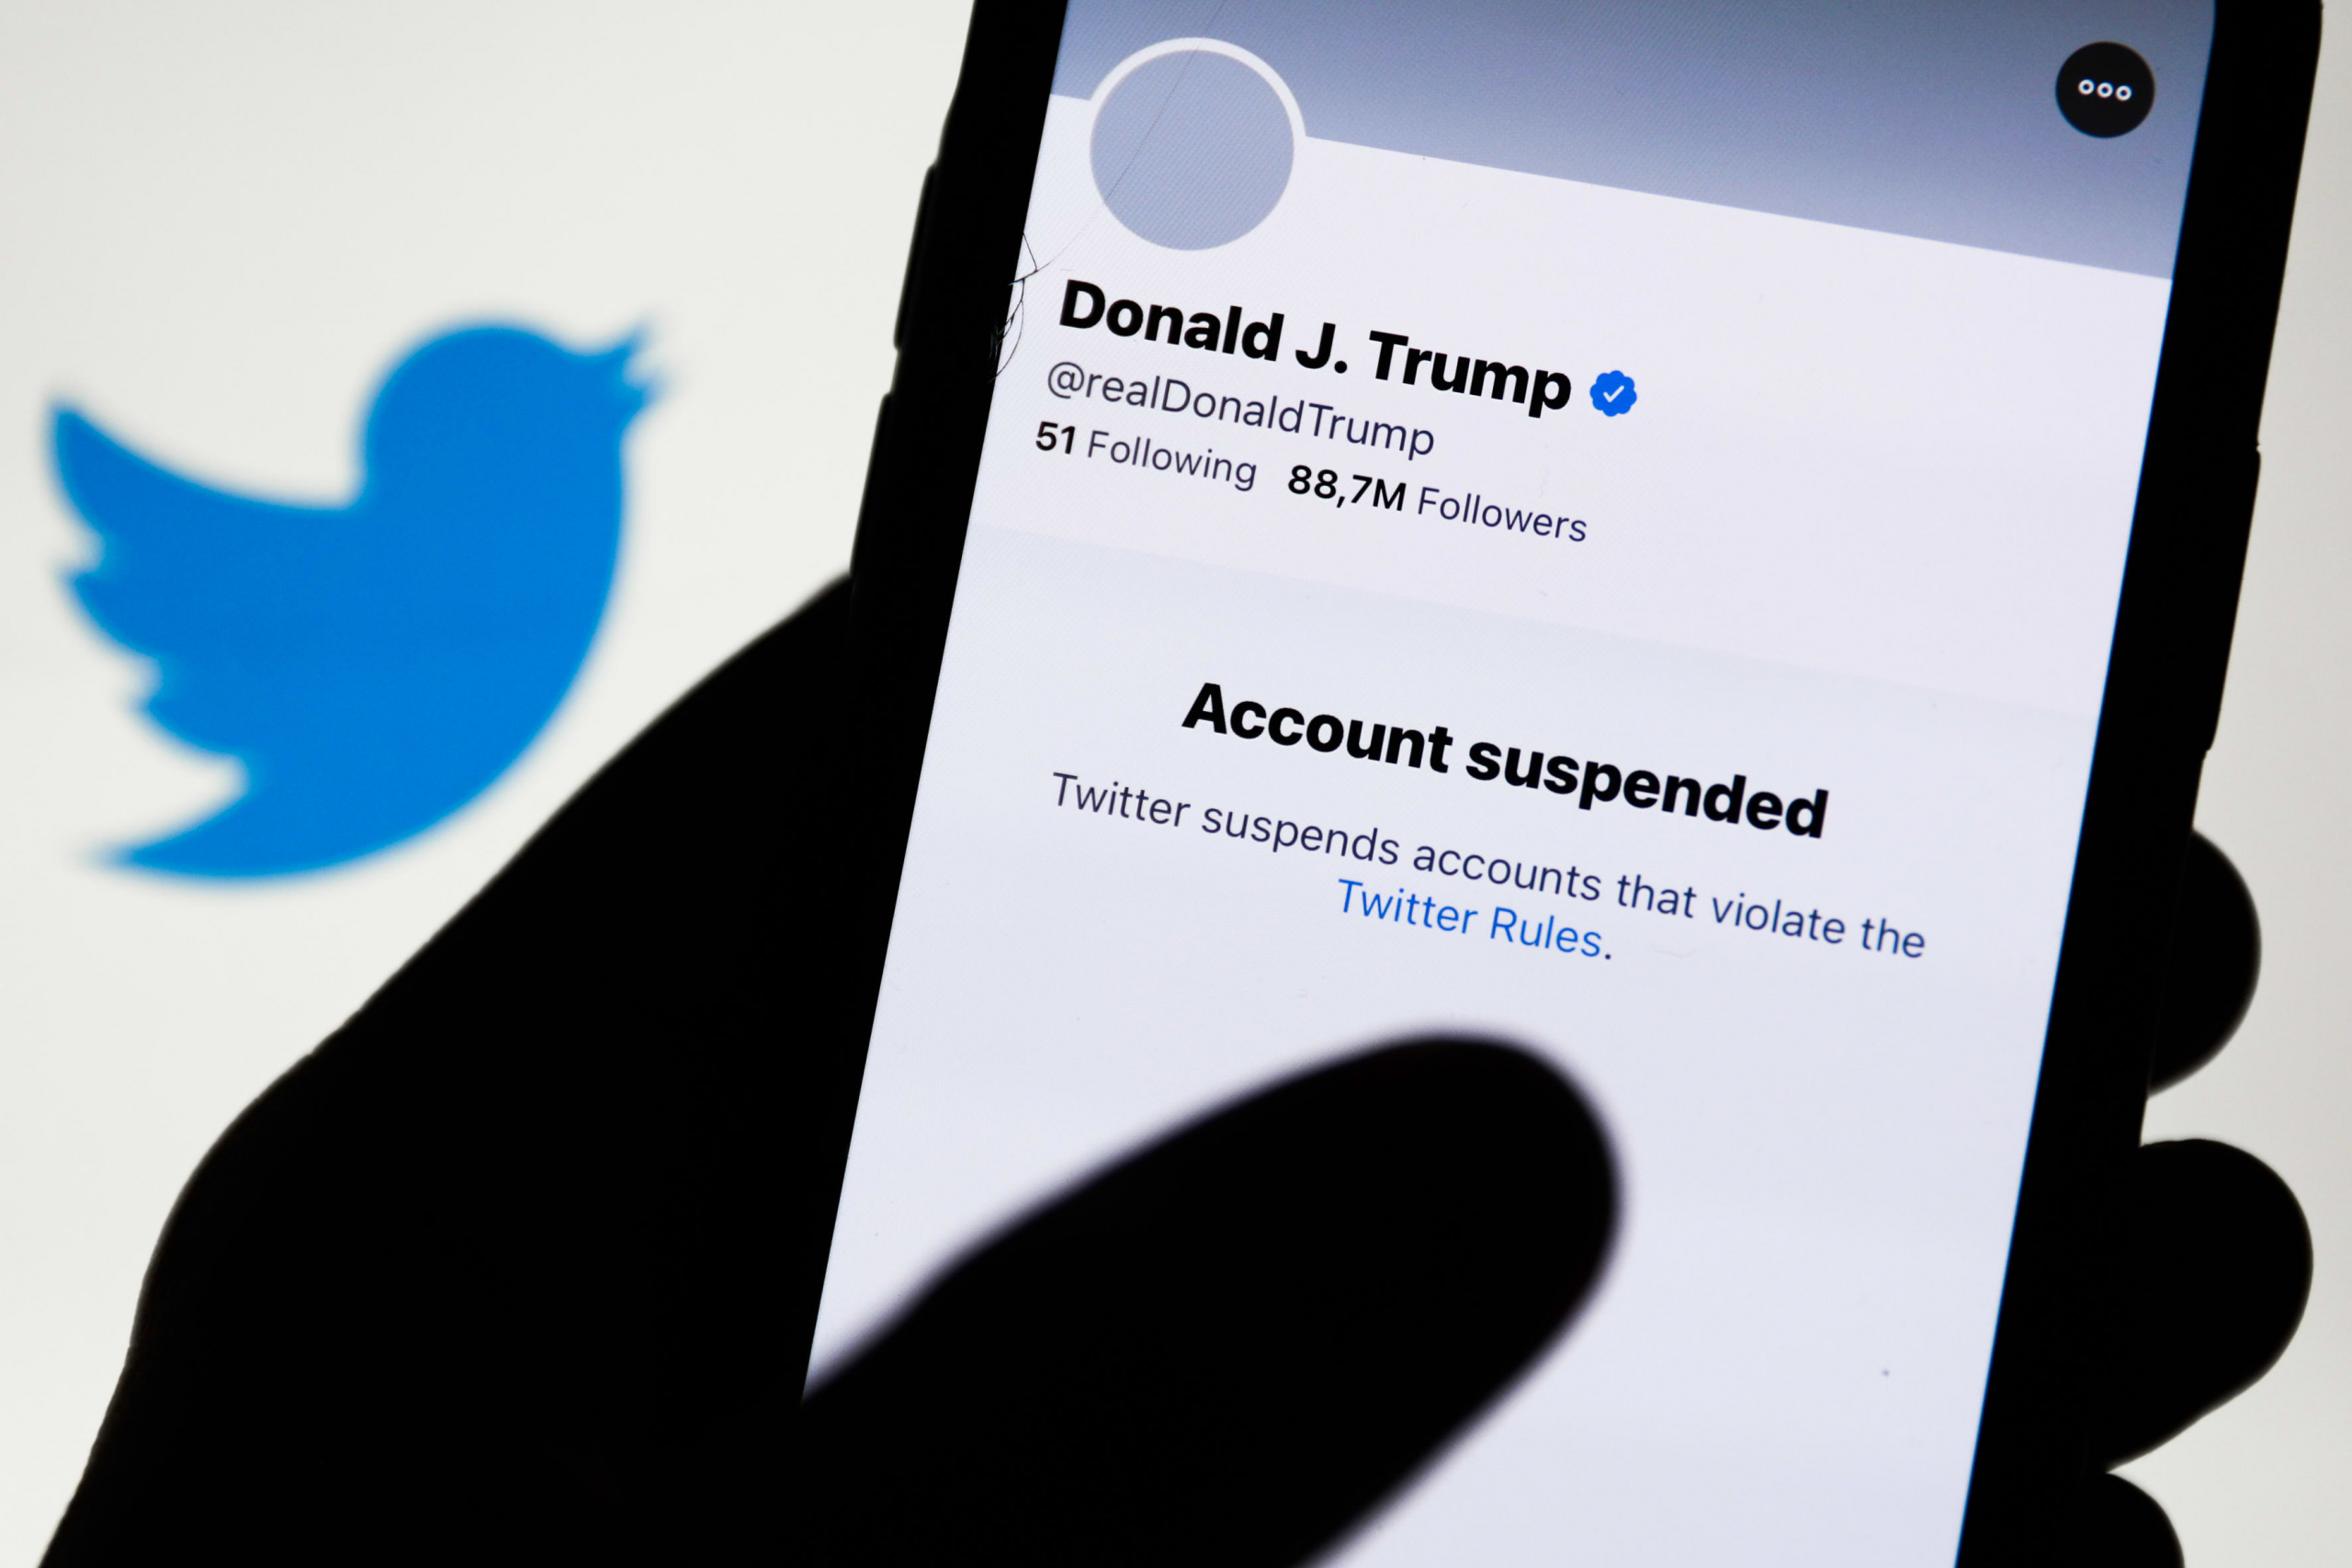 Fake news & Click bait - Trump banned from Twitter